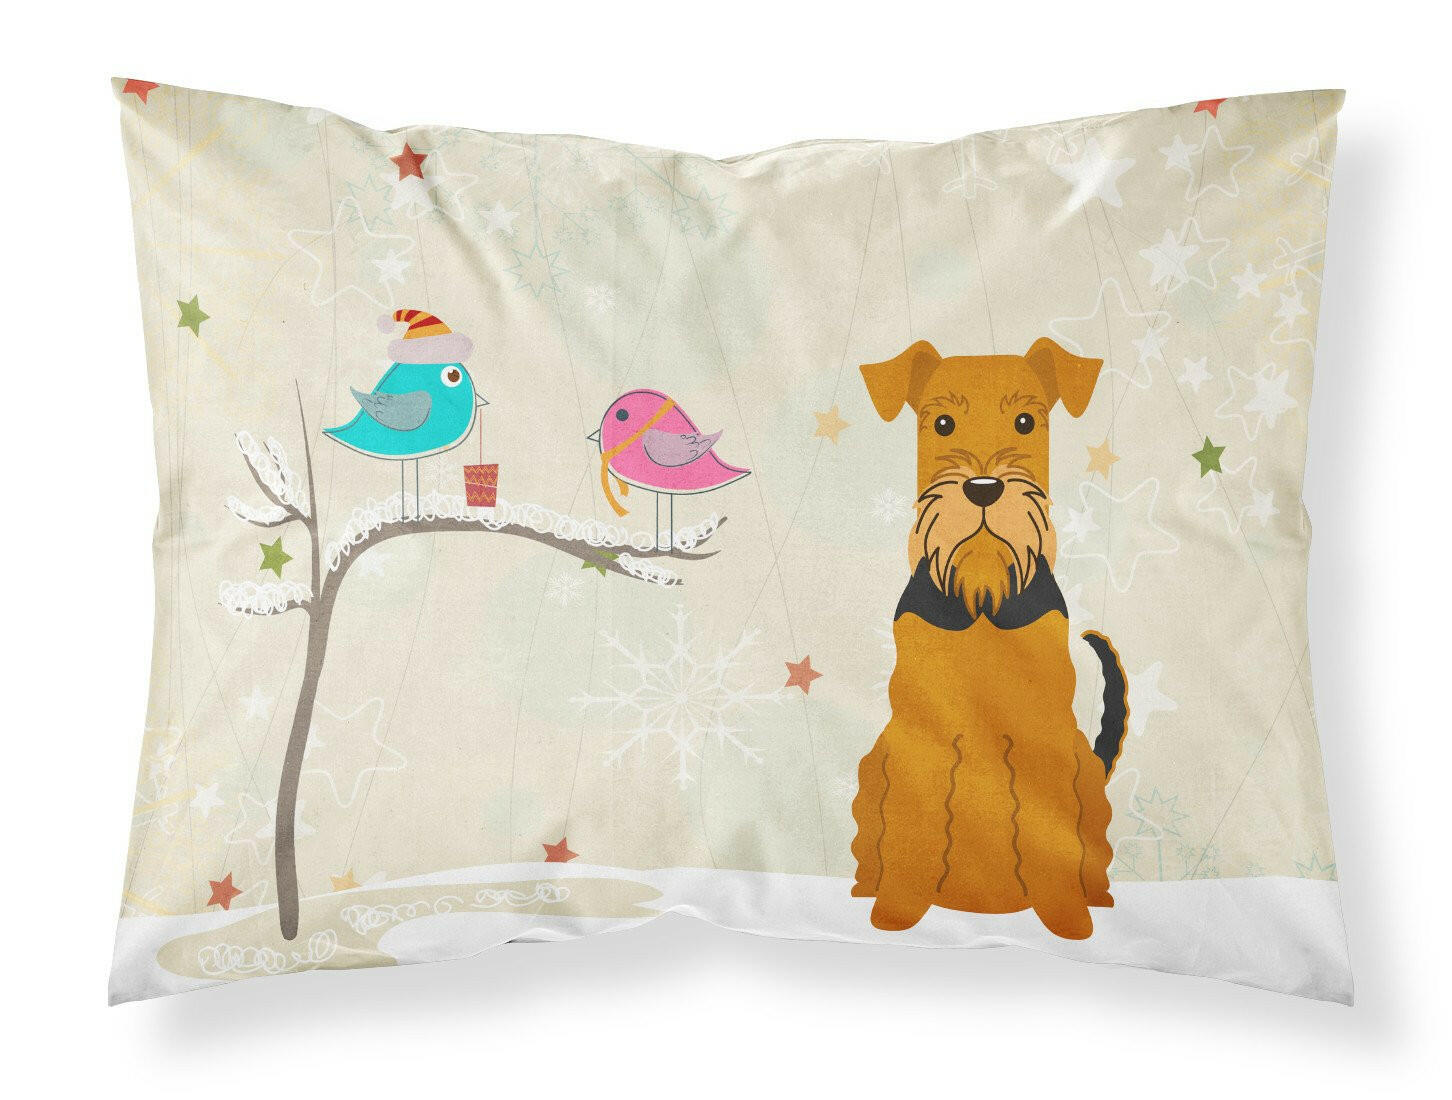 Christmas Presents between Friends Airedale Fabric Standard Pillowcase BB2513PILLOWCASE by Caroline's Treasures